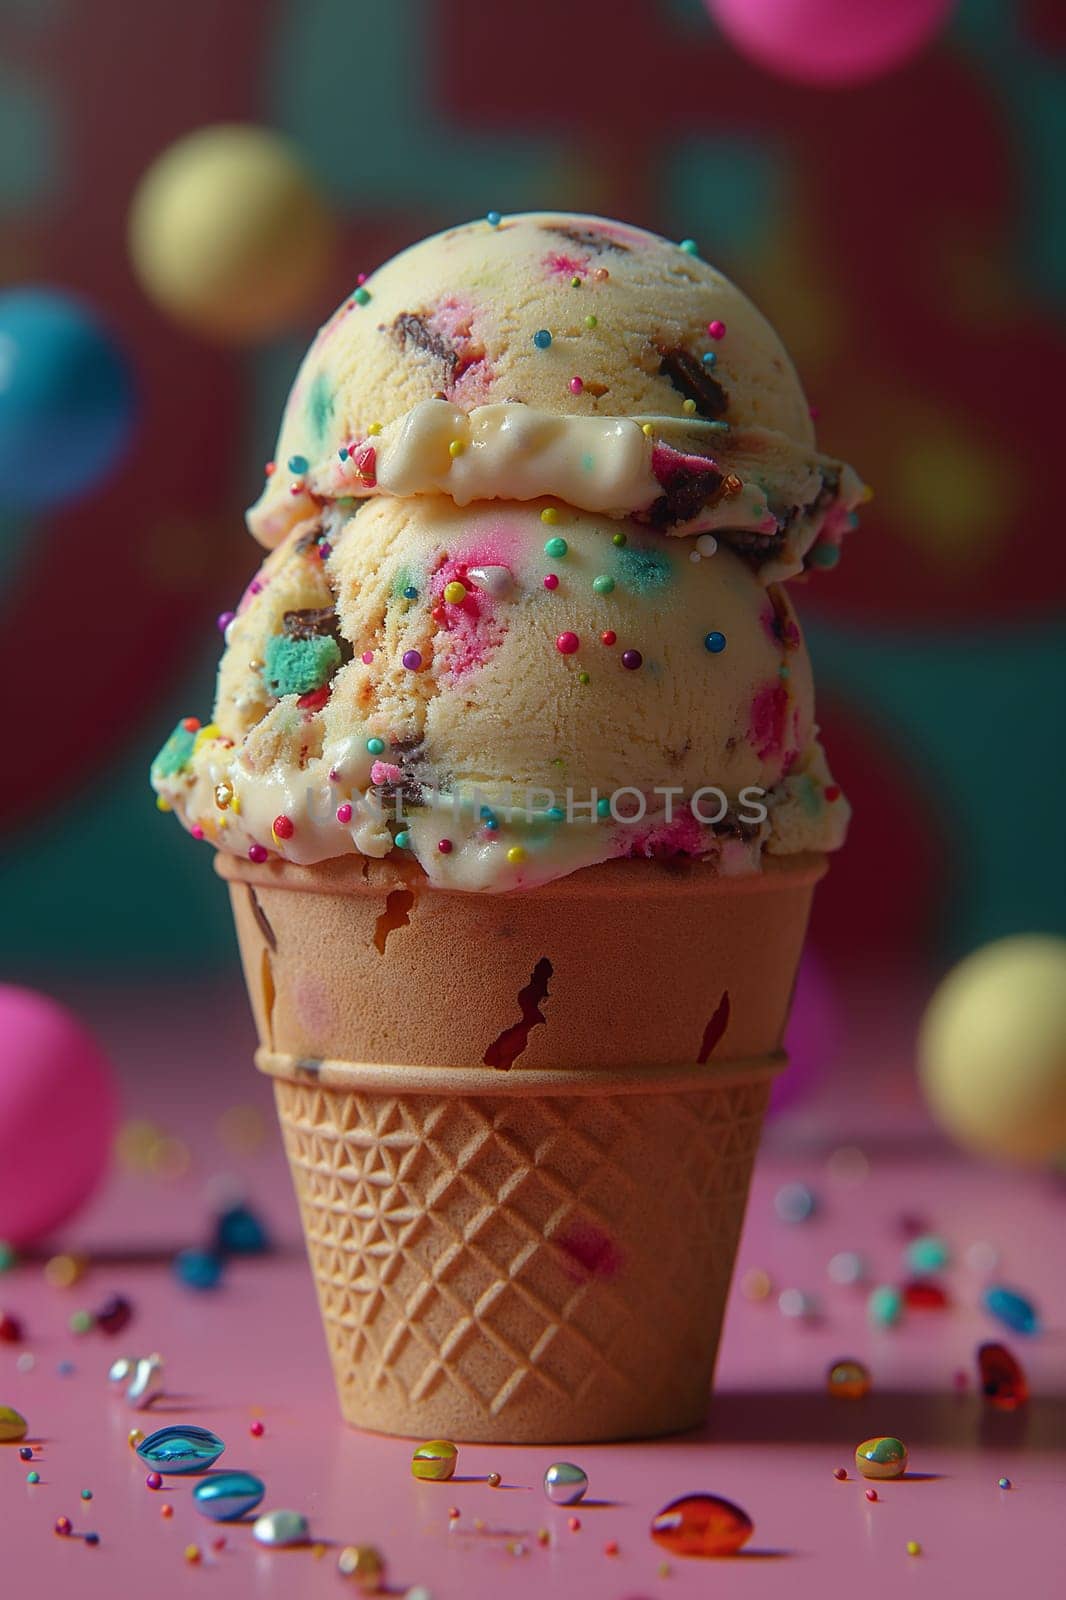 Scoops of multicolored ice cream in a cone with sprinkles and a blurred background.